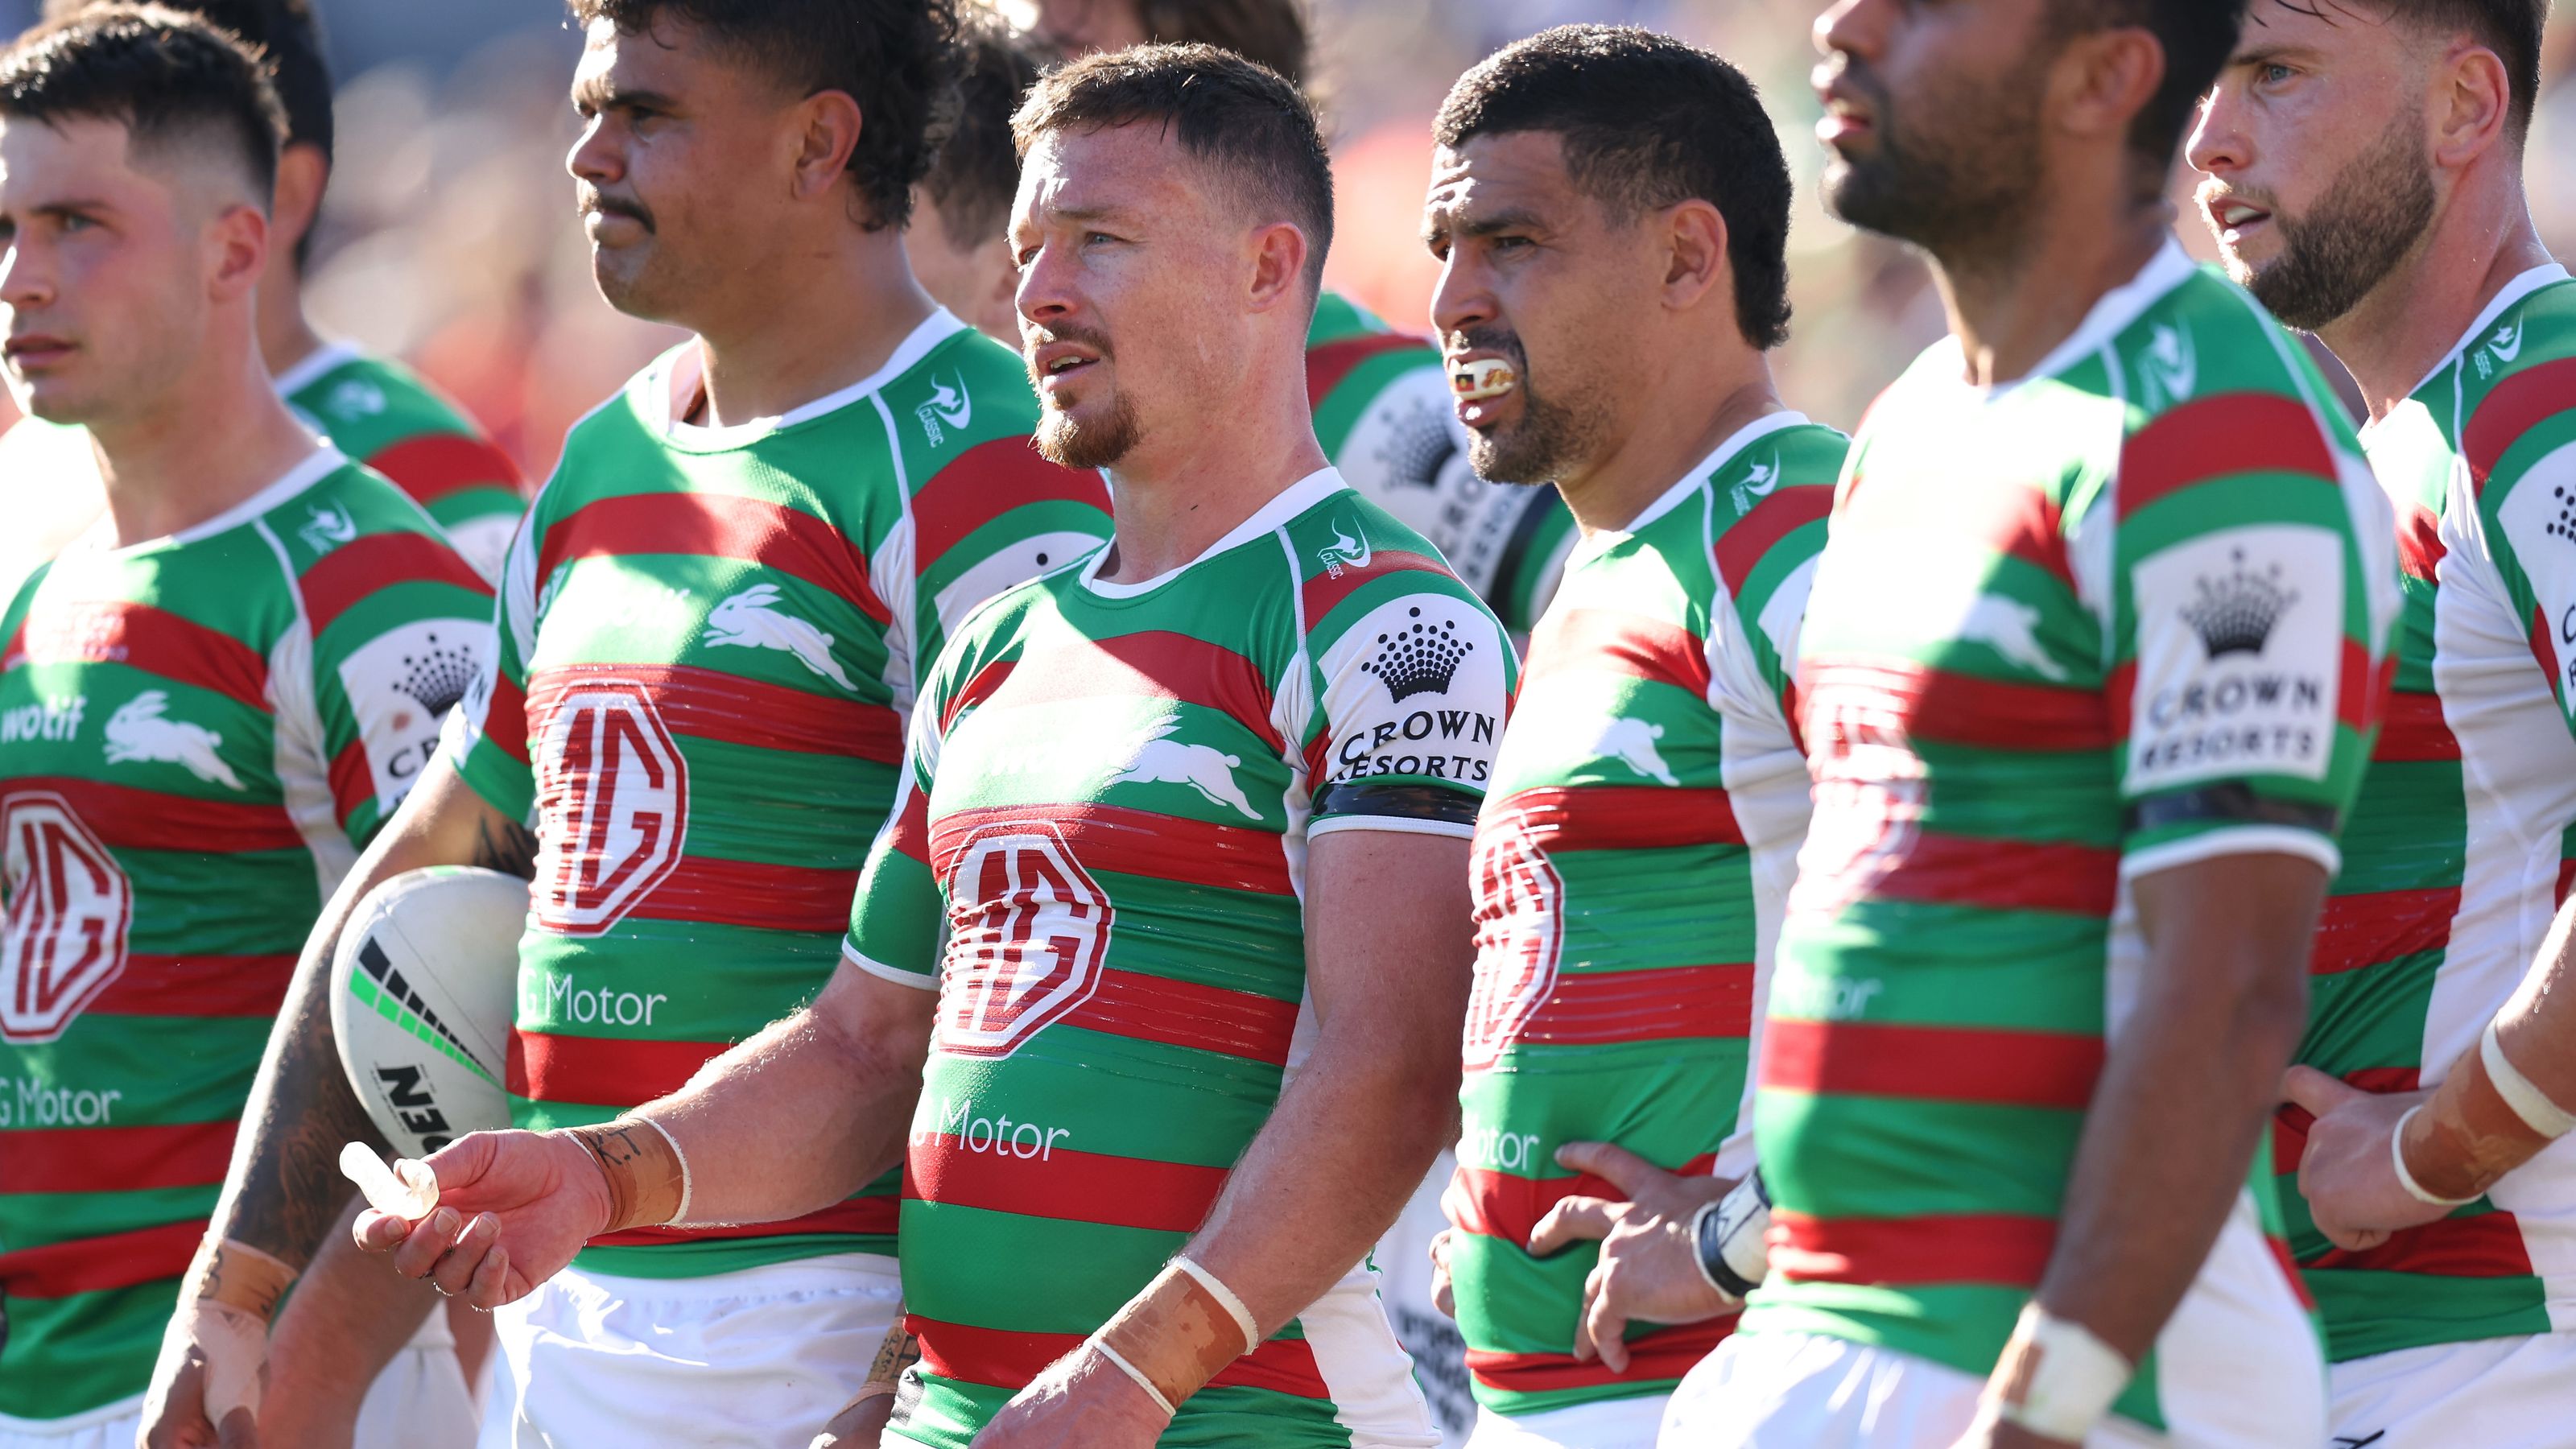 South Sydney players look on after an opposition try.